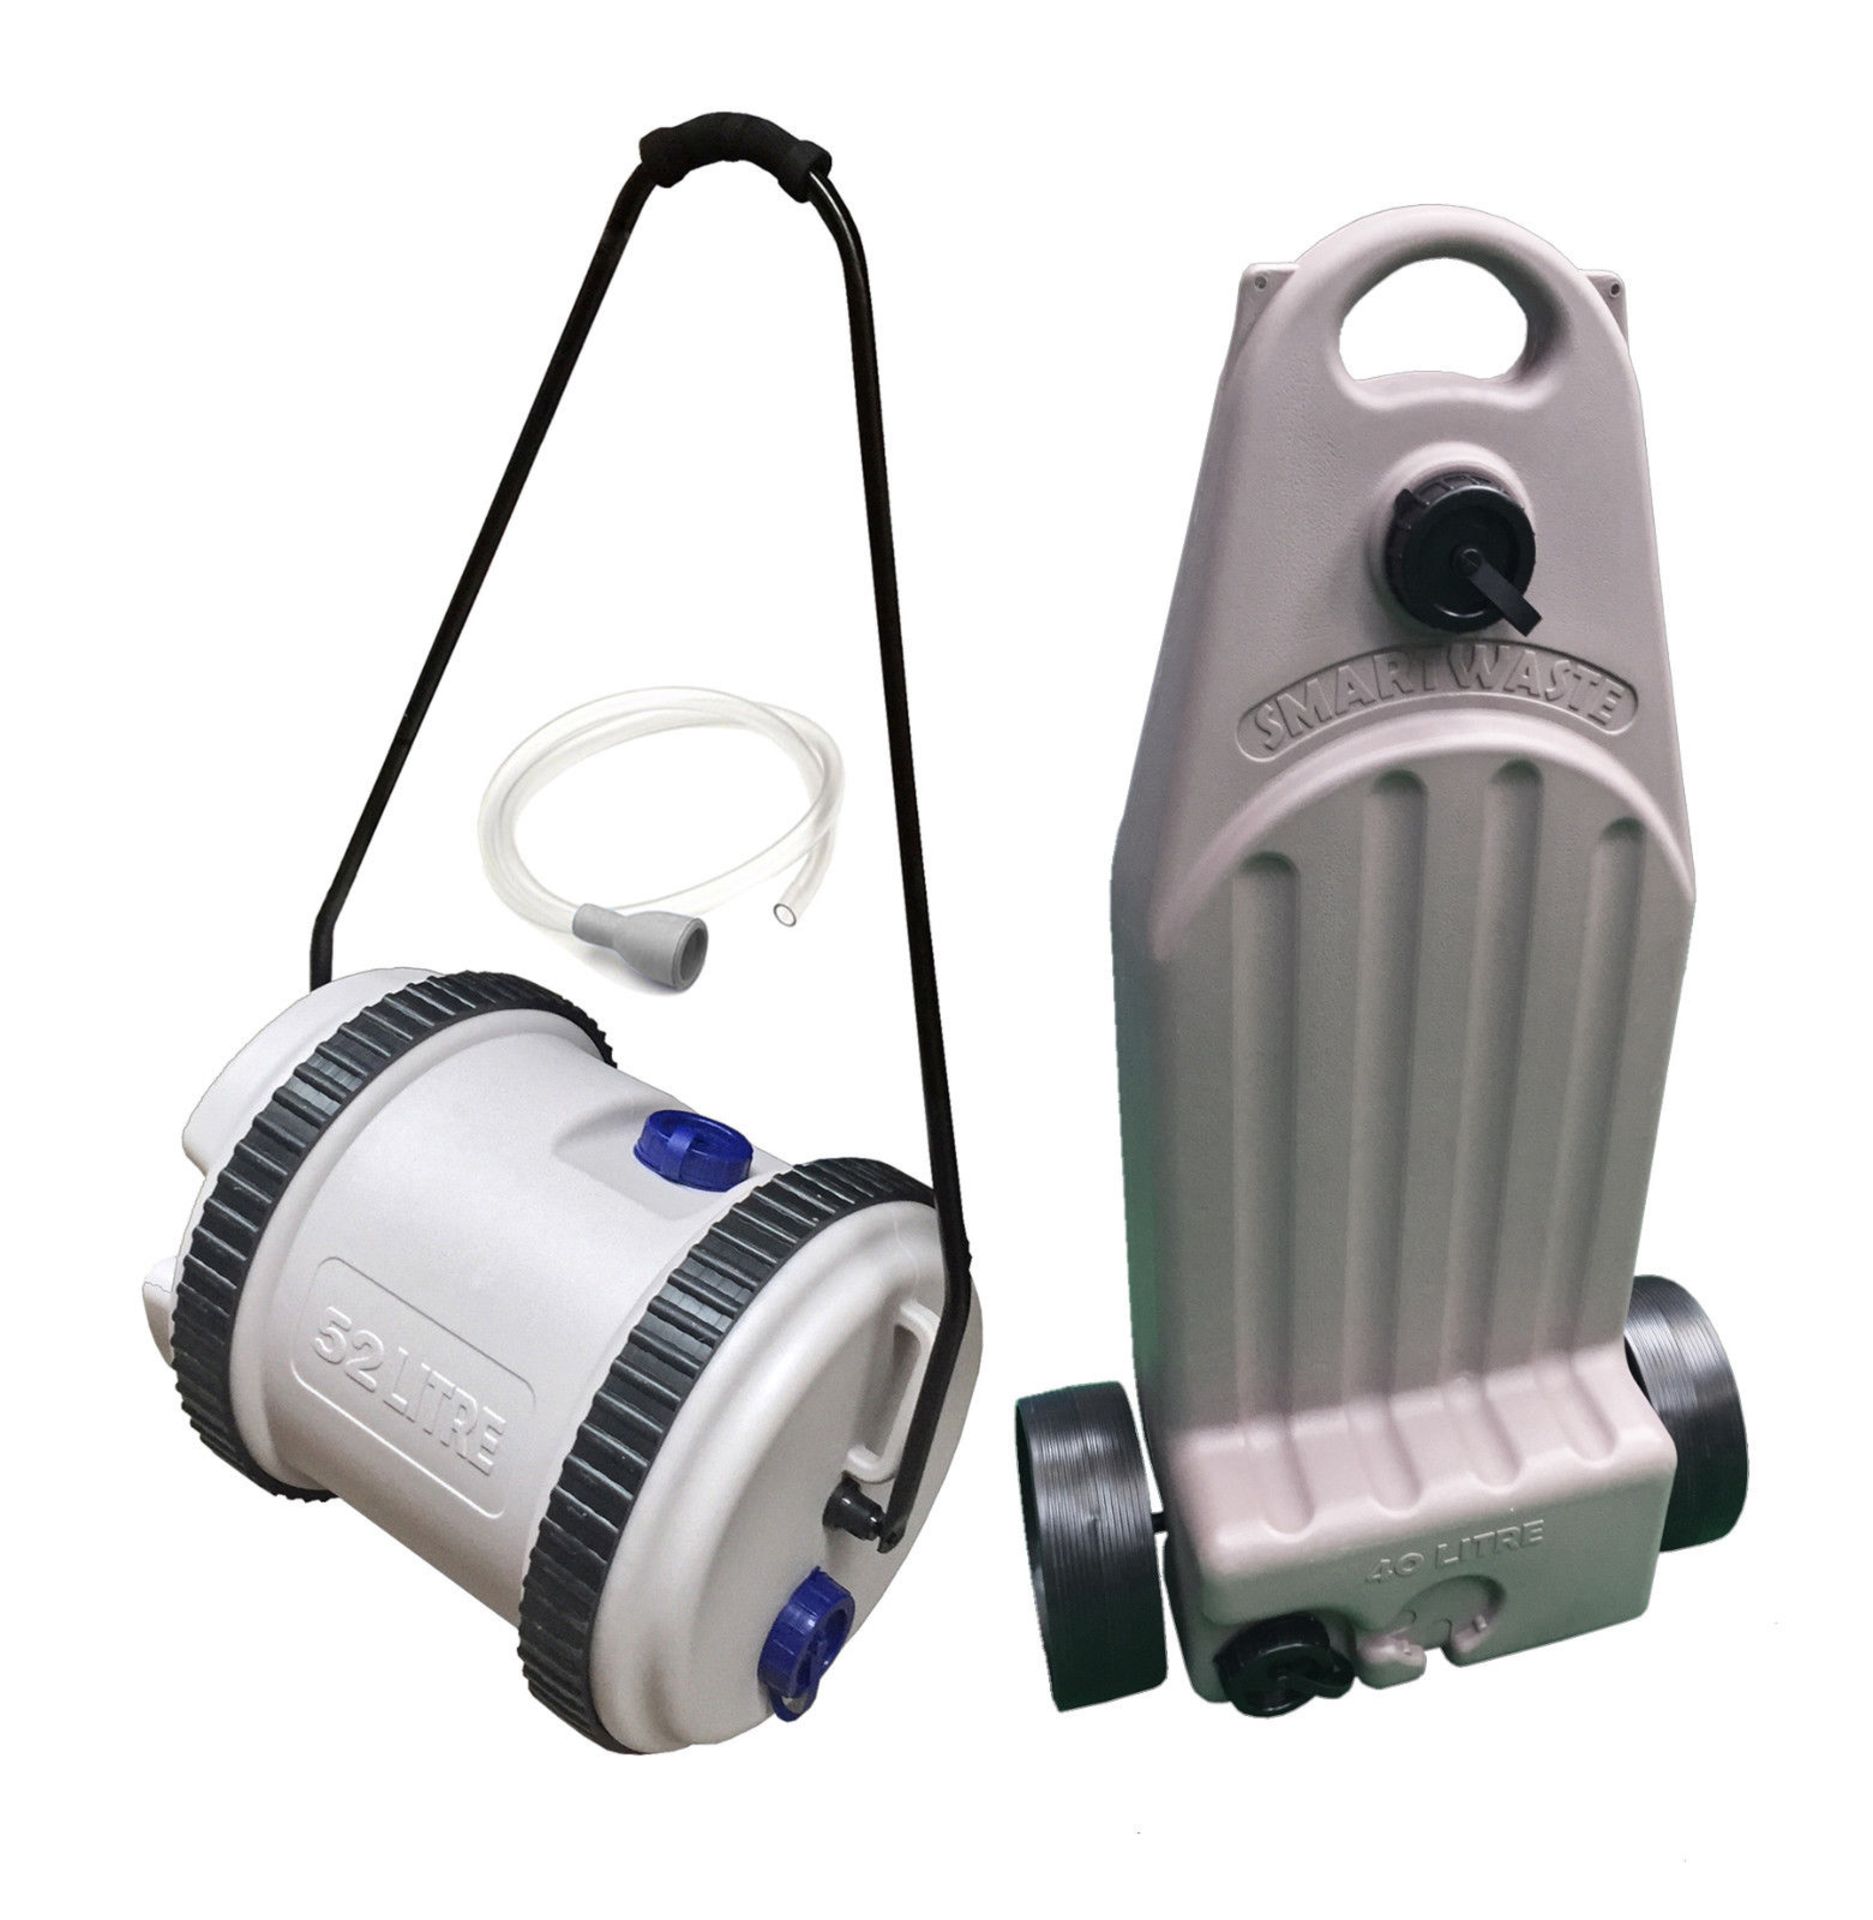 52 Litre FRESH WATER and 40 Litre WASTE CARRIER - QTY: 1 The fresh water roller is ideal for